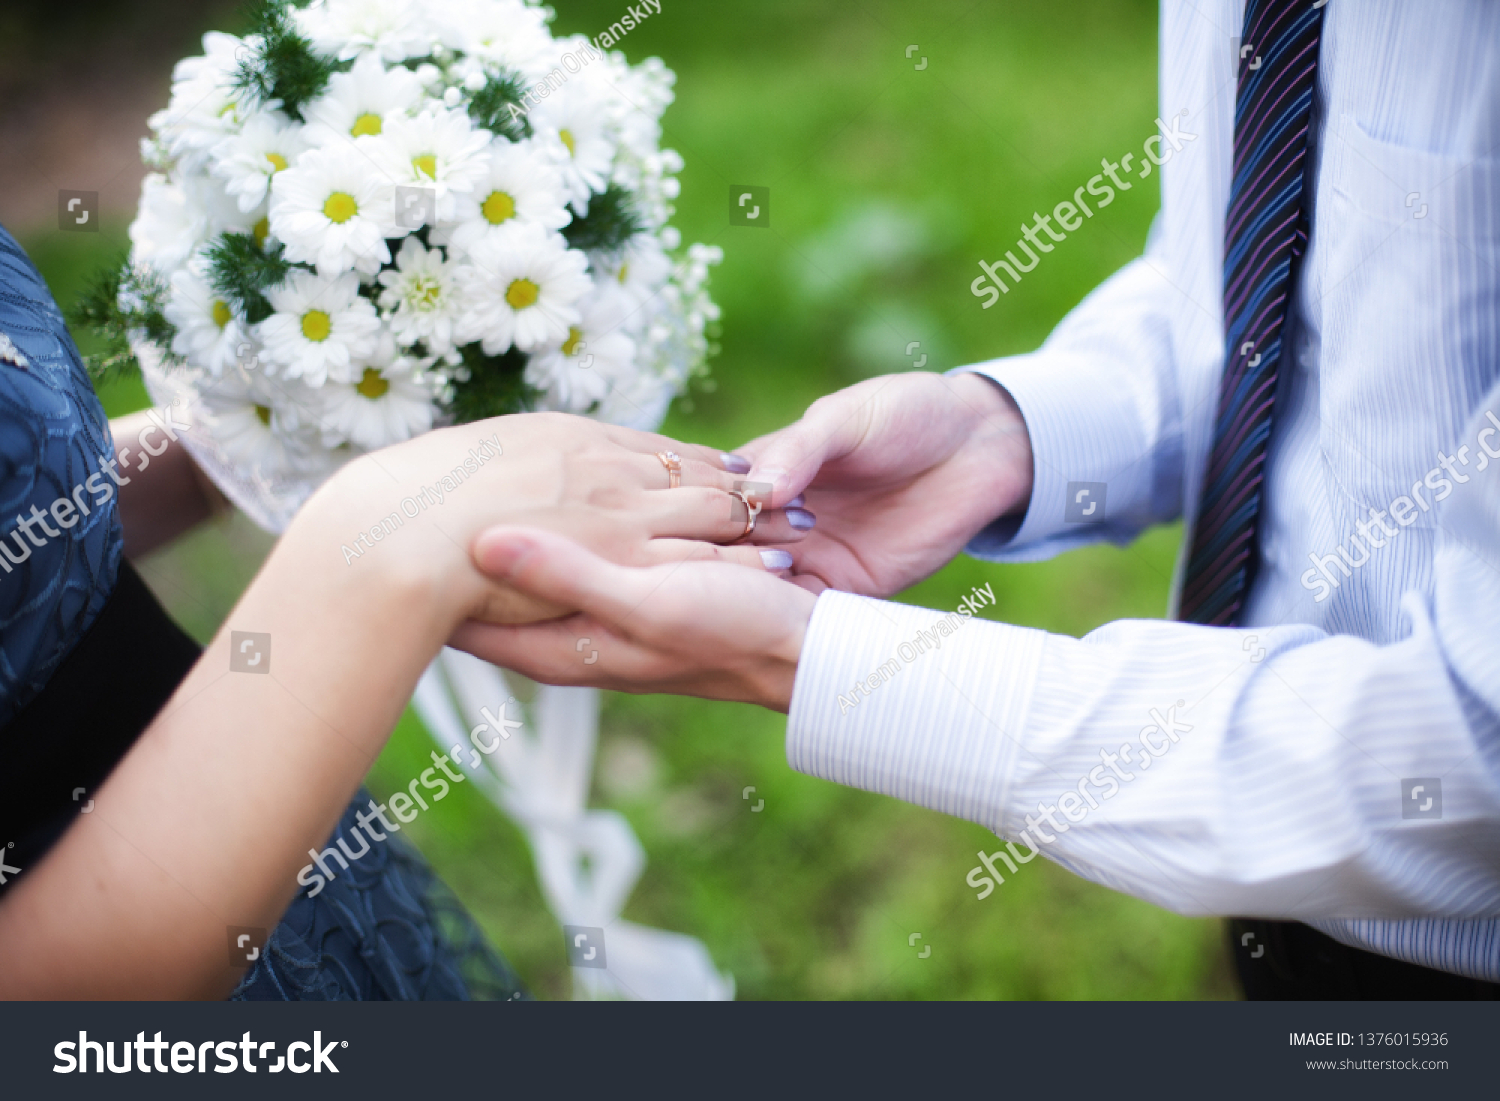 Wedding rings, wedding day. Wedding couple. He put an engagement ring on her. bridegroom puts the ring on the bride in nature. the moment when the groom puts the ring on the bride. #1376015936